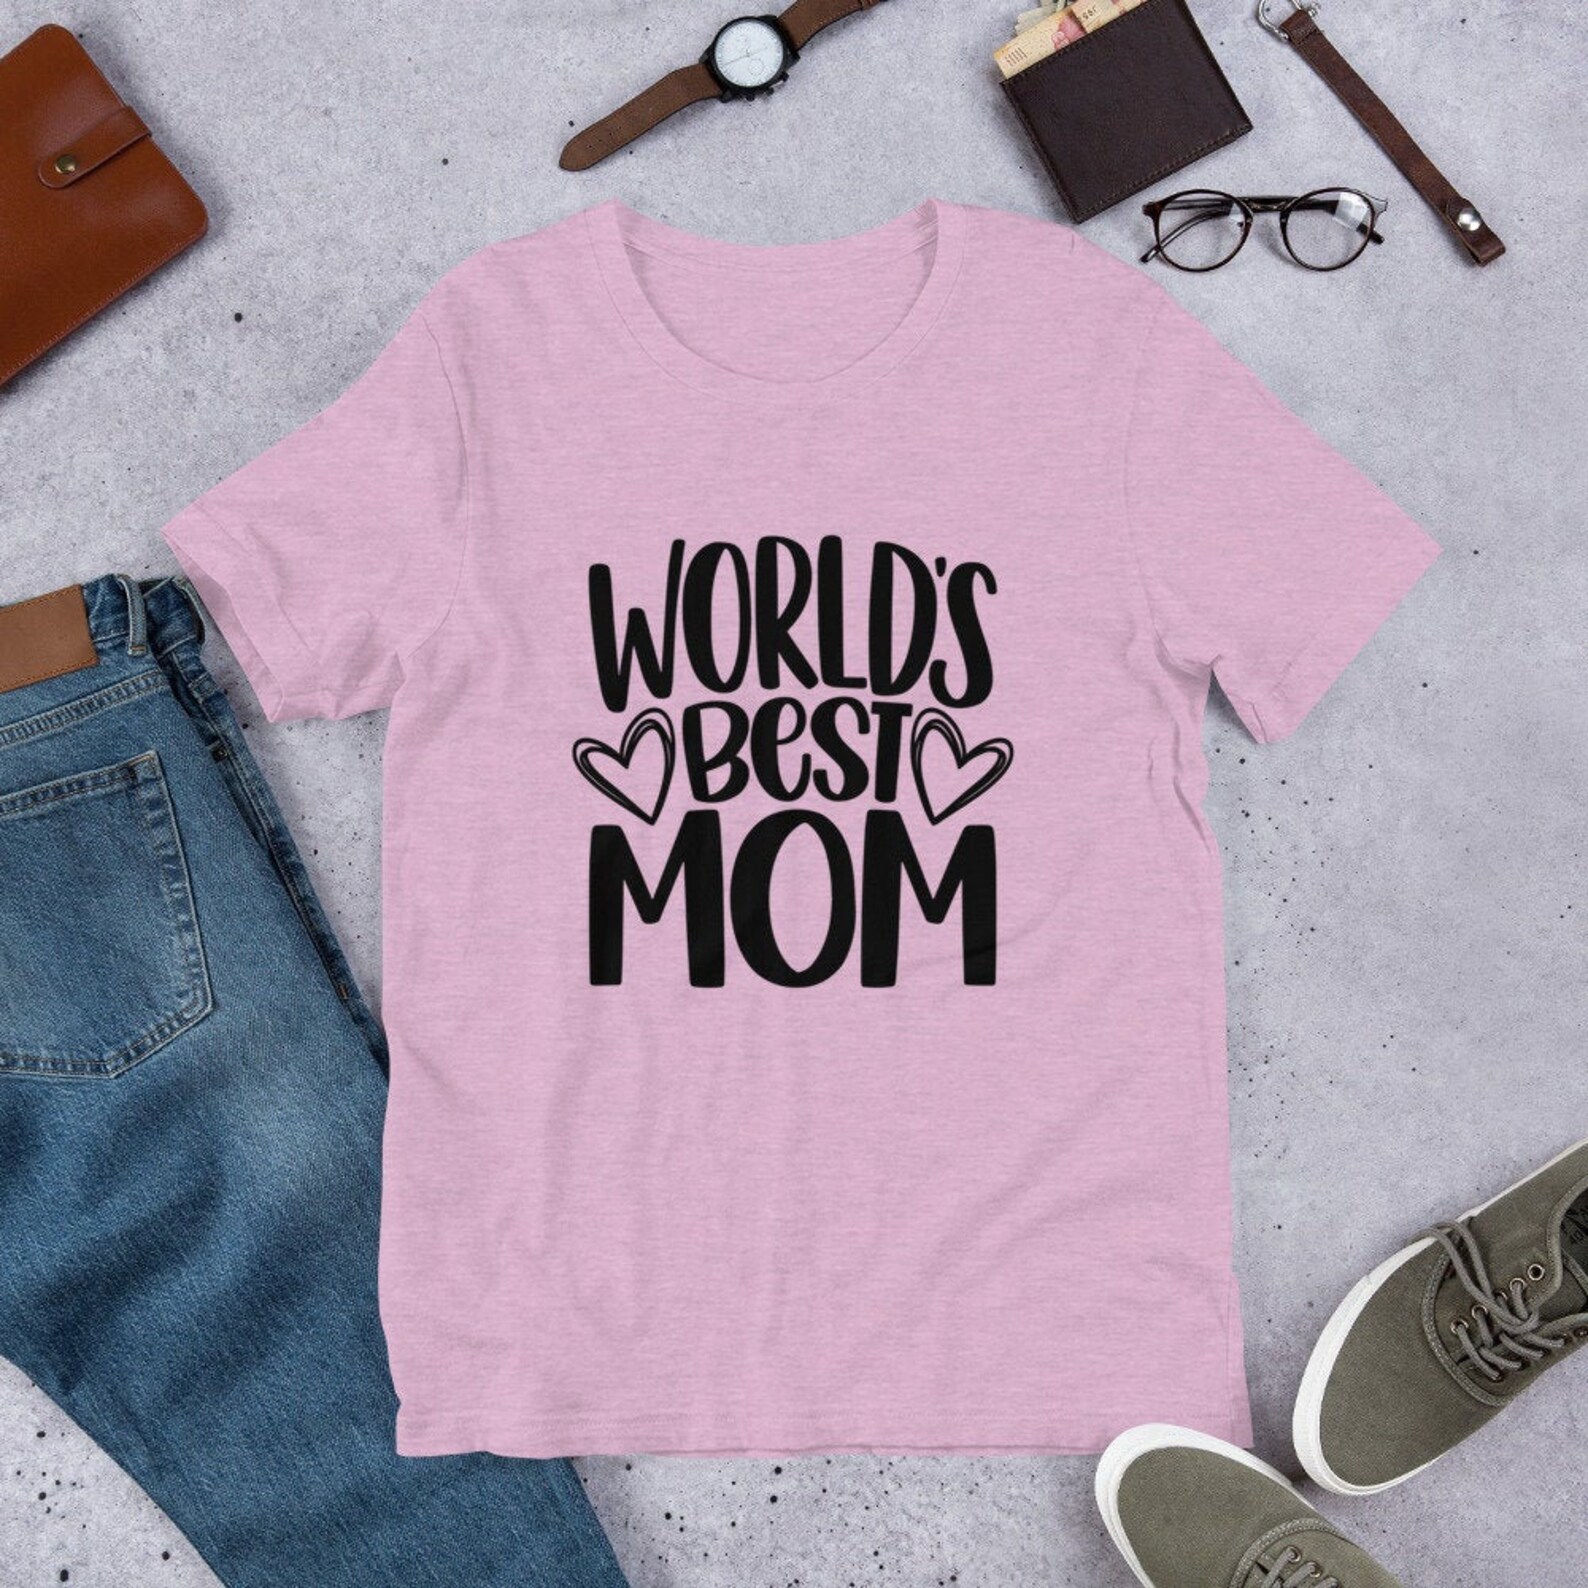 Funny Mothers Day T Shirts Best Mom T Shirt Design Etsy